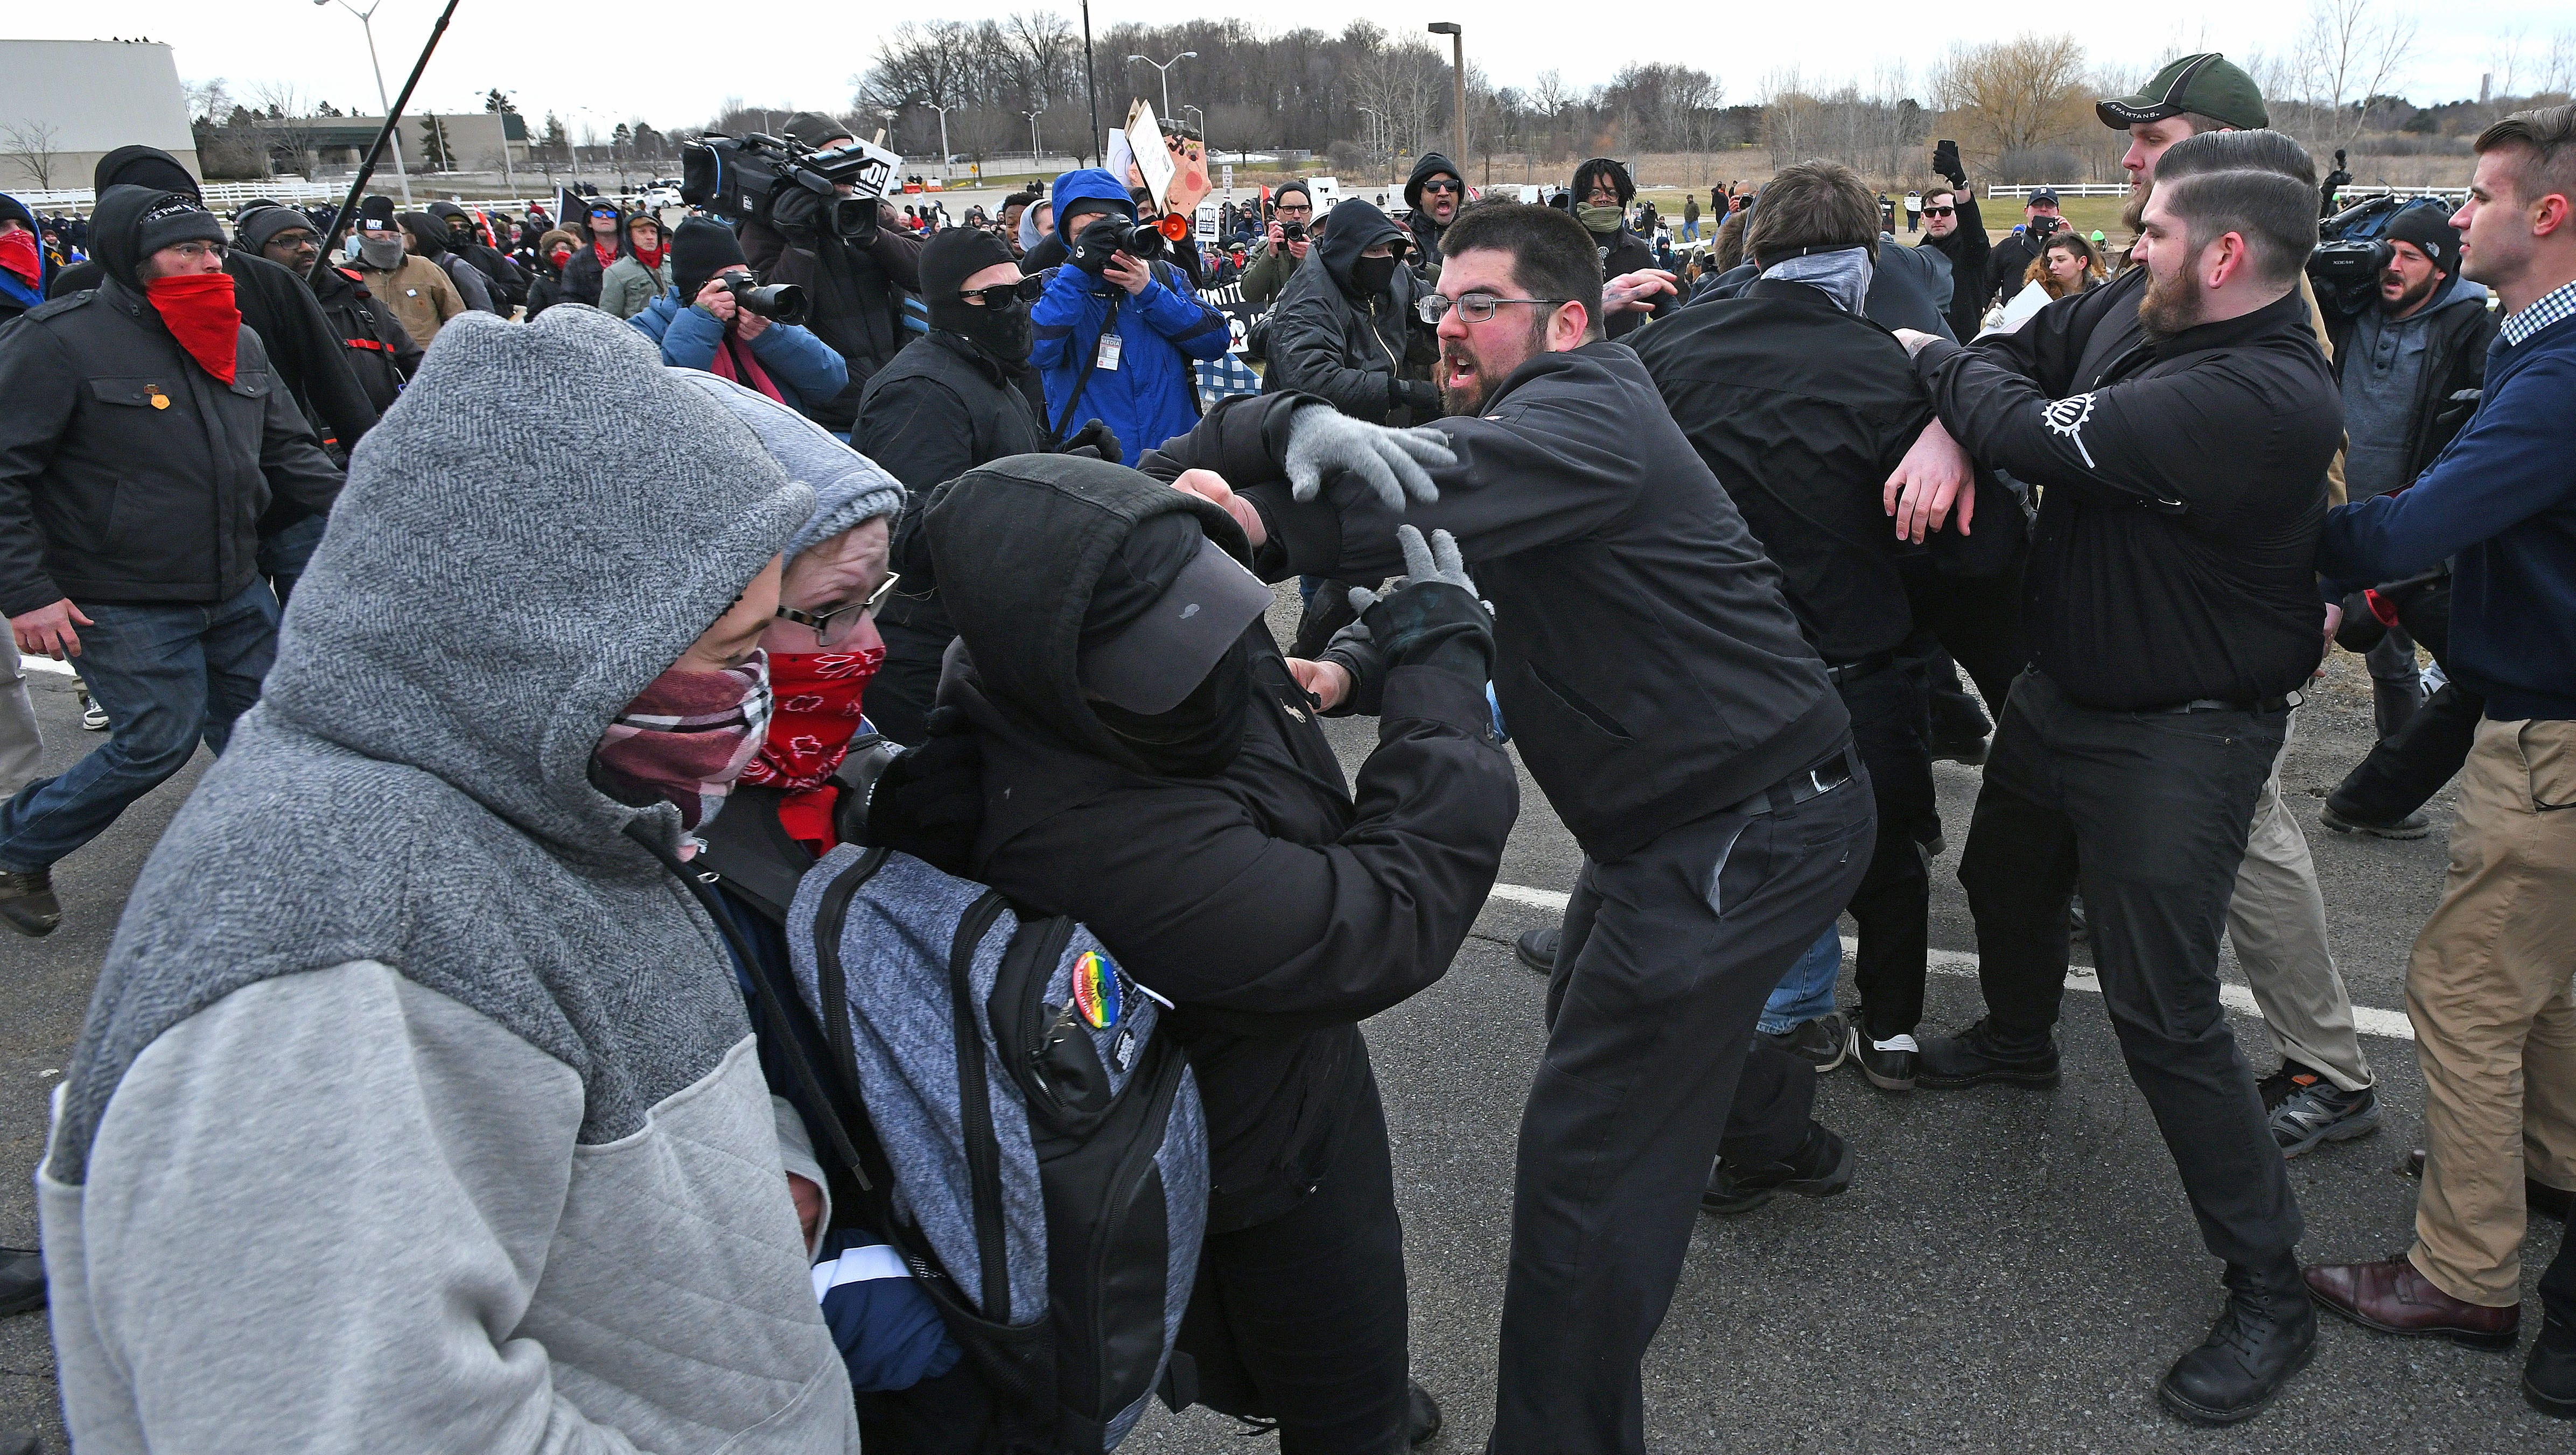 Protesters, left, clash with Spencer sympathizers, right side, outside the MSU Pavilion.